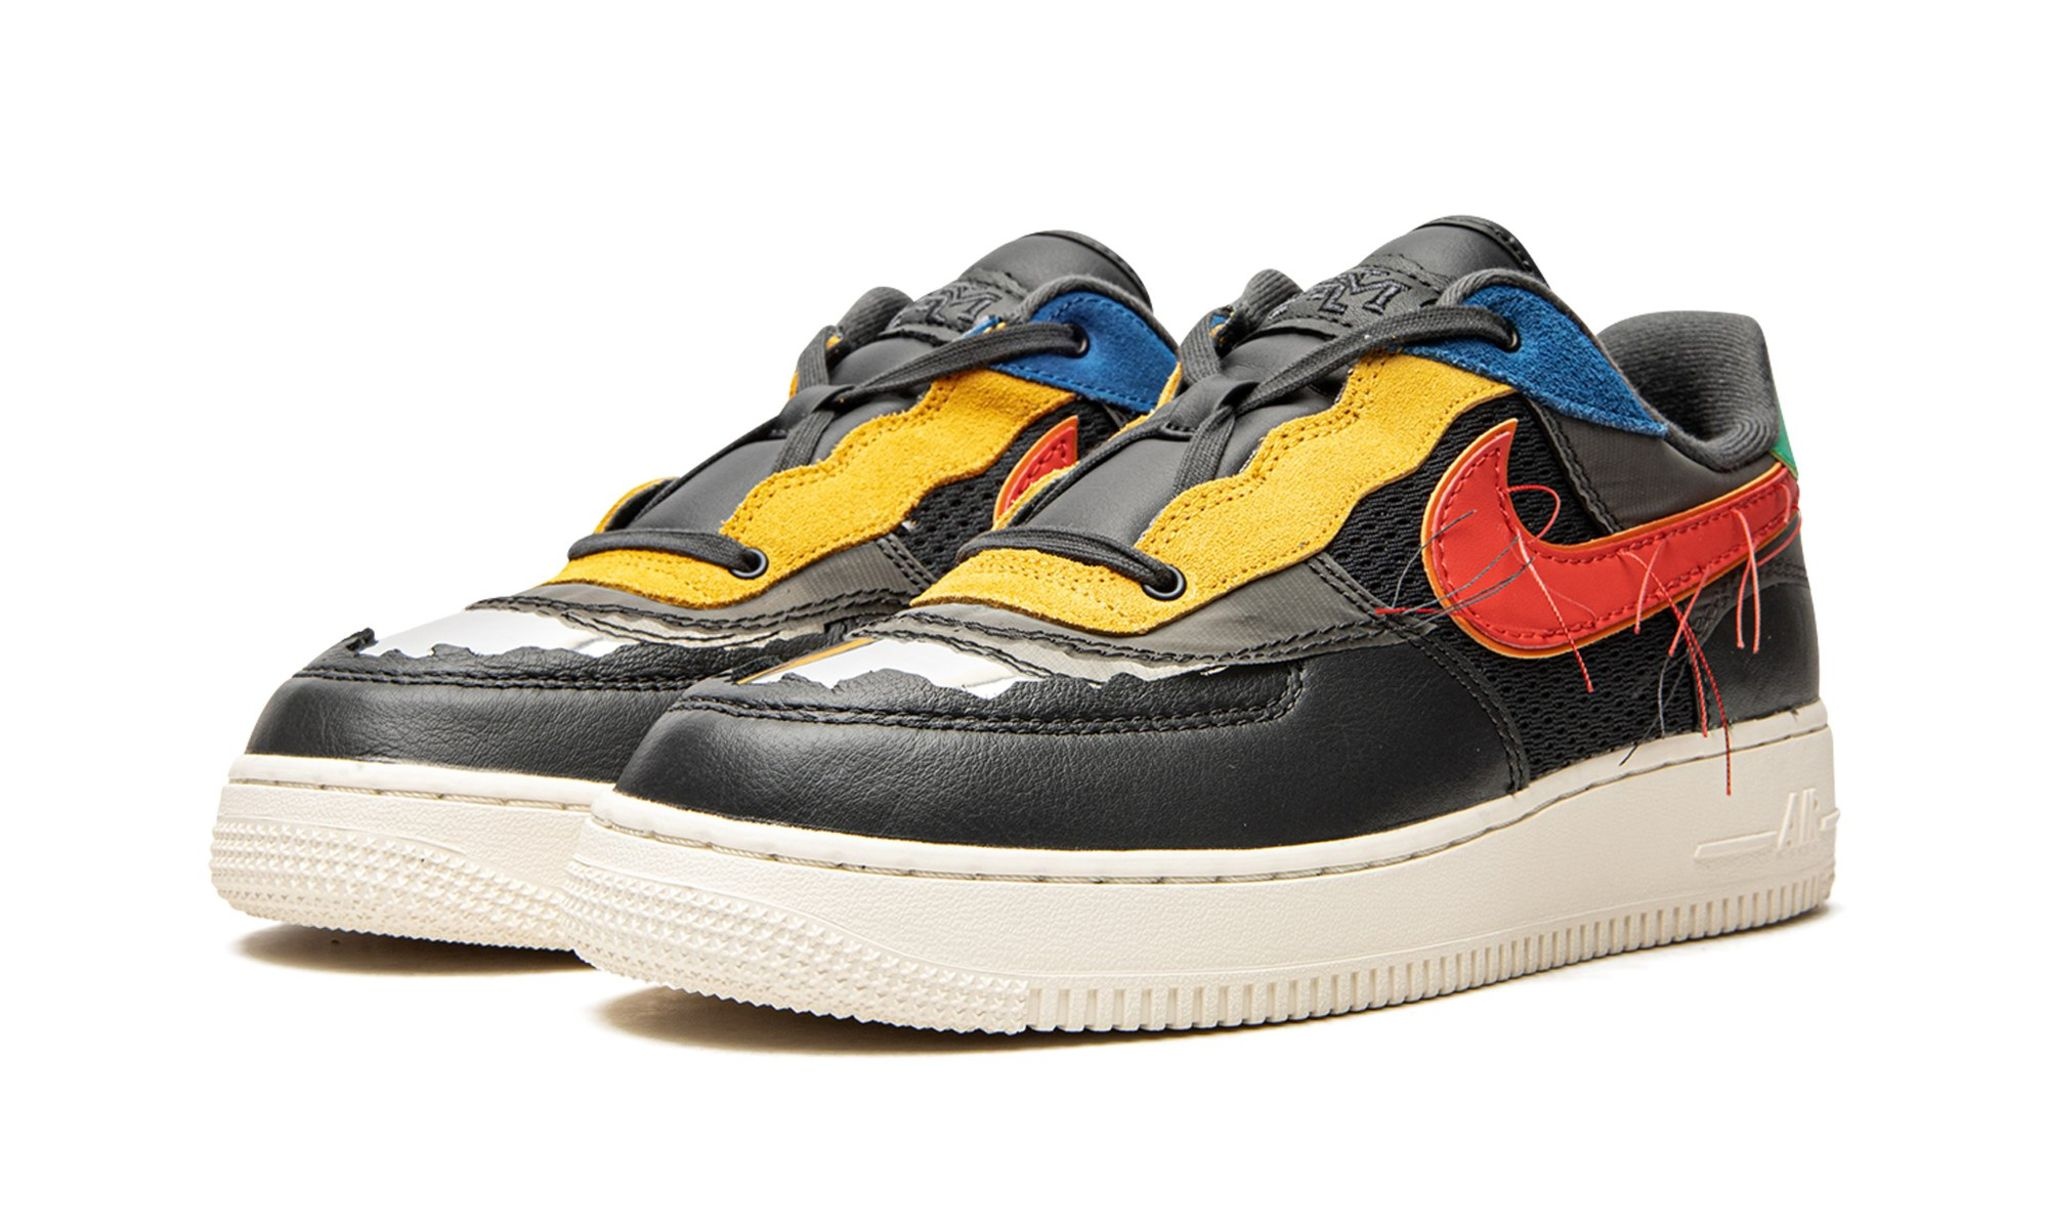 Air Force 1 Low "BHM/Black History Month 2020" - 2